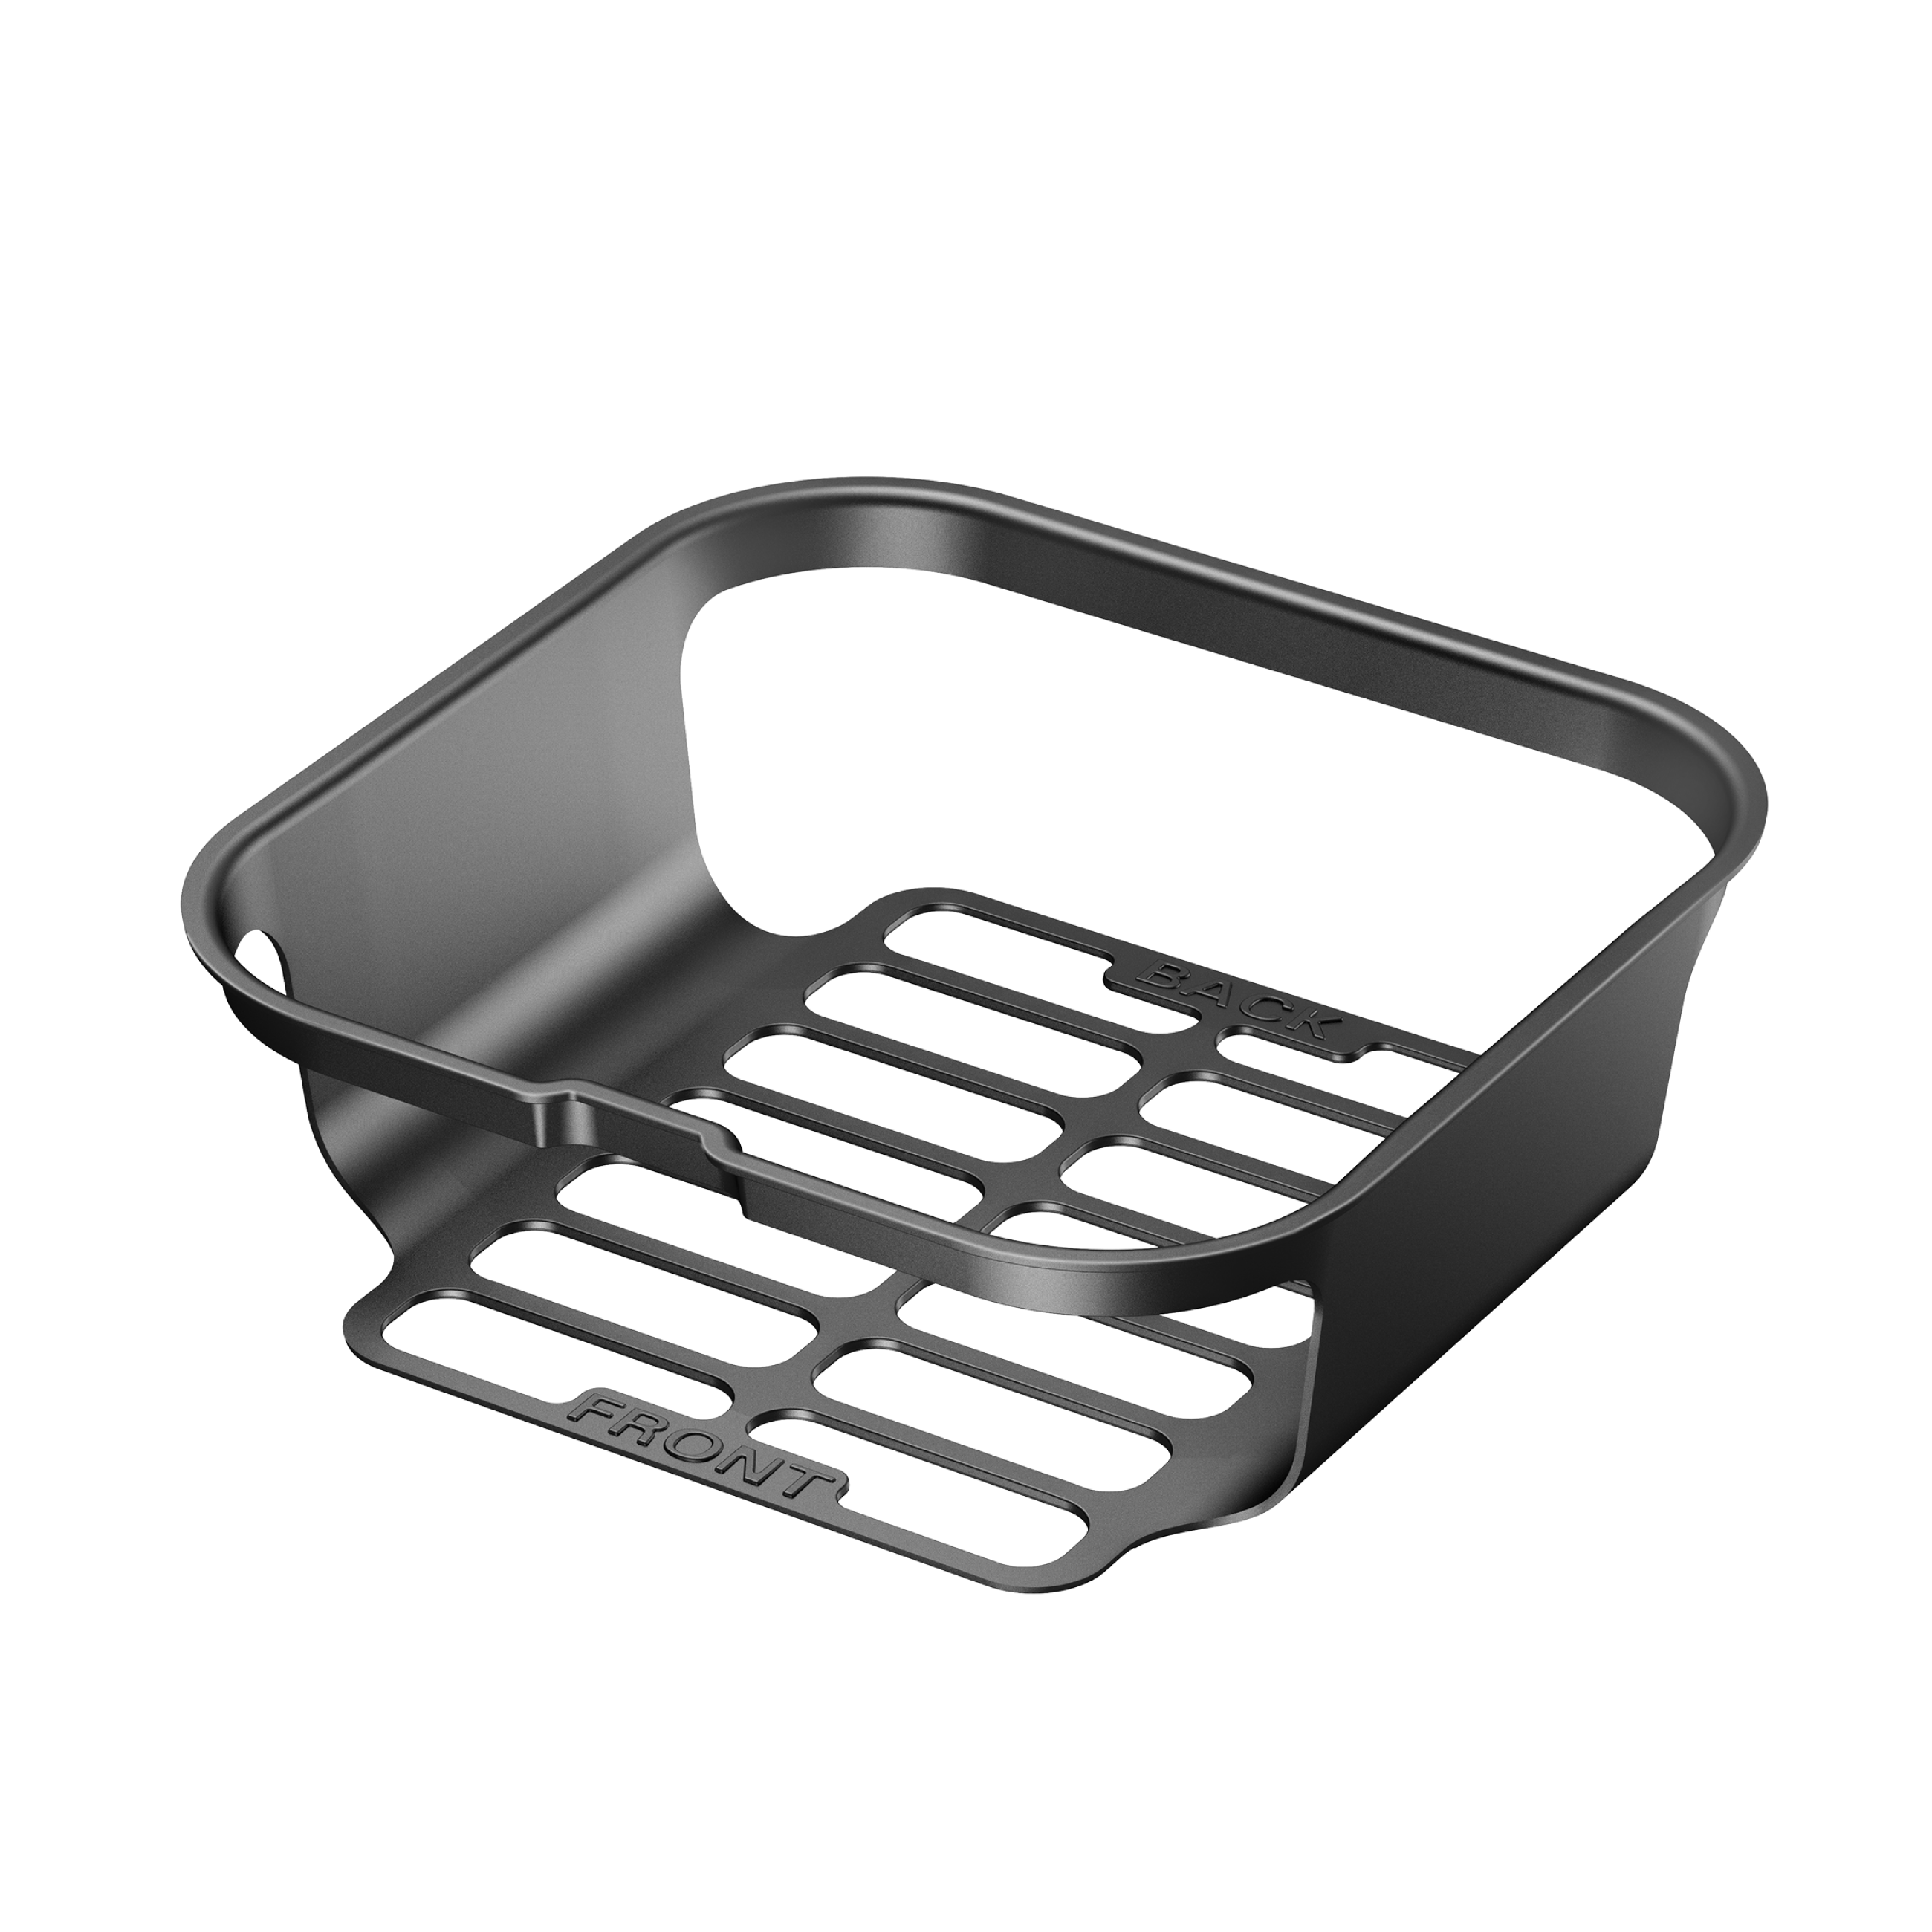 Extra Dreo ChefMaker Cooking Tray - Dreo